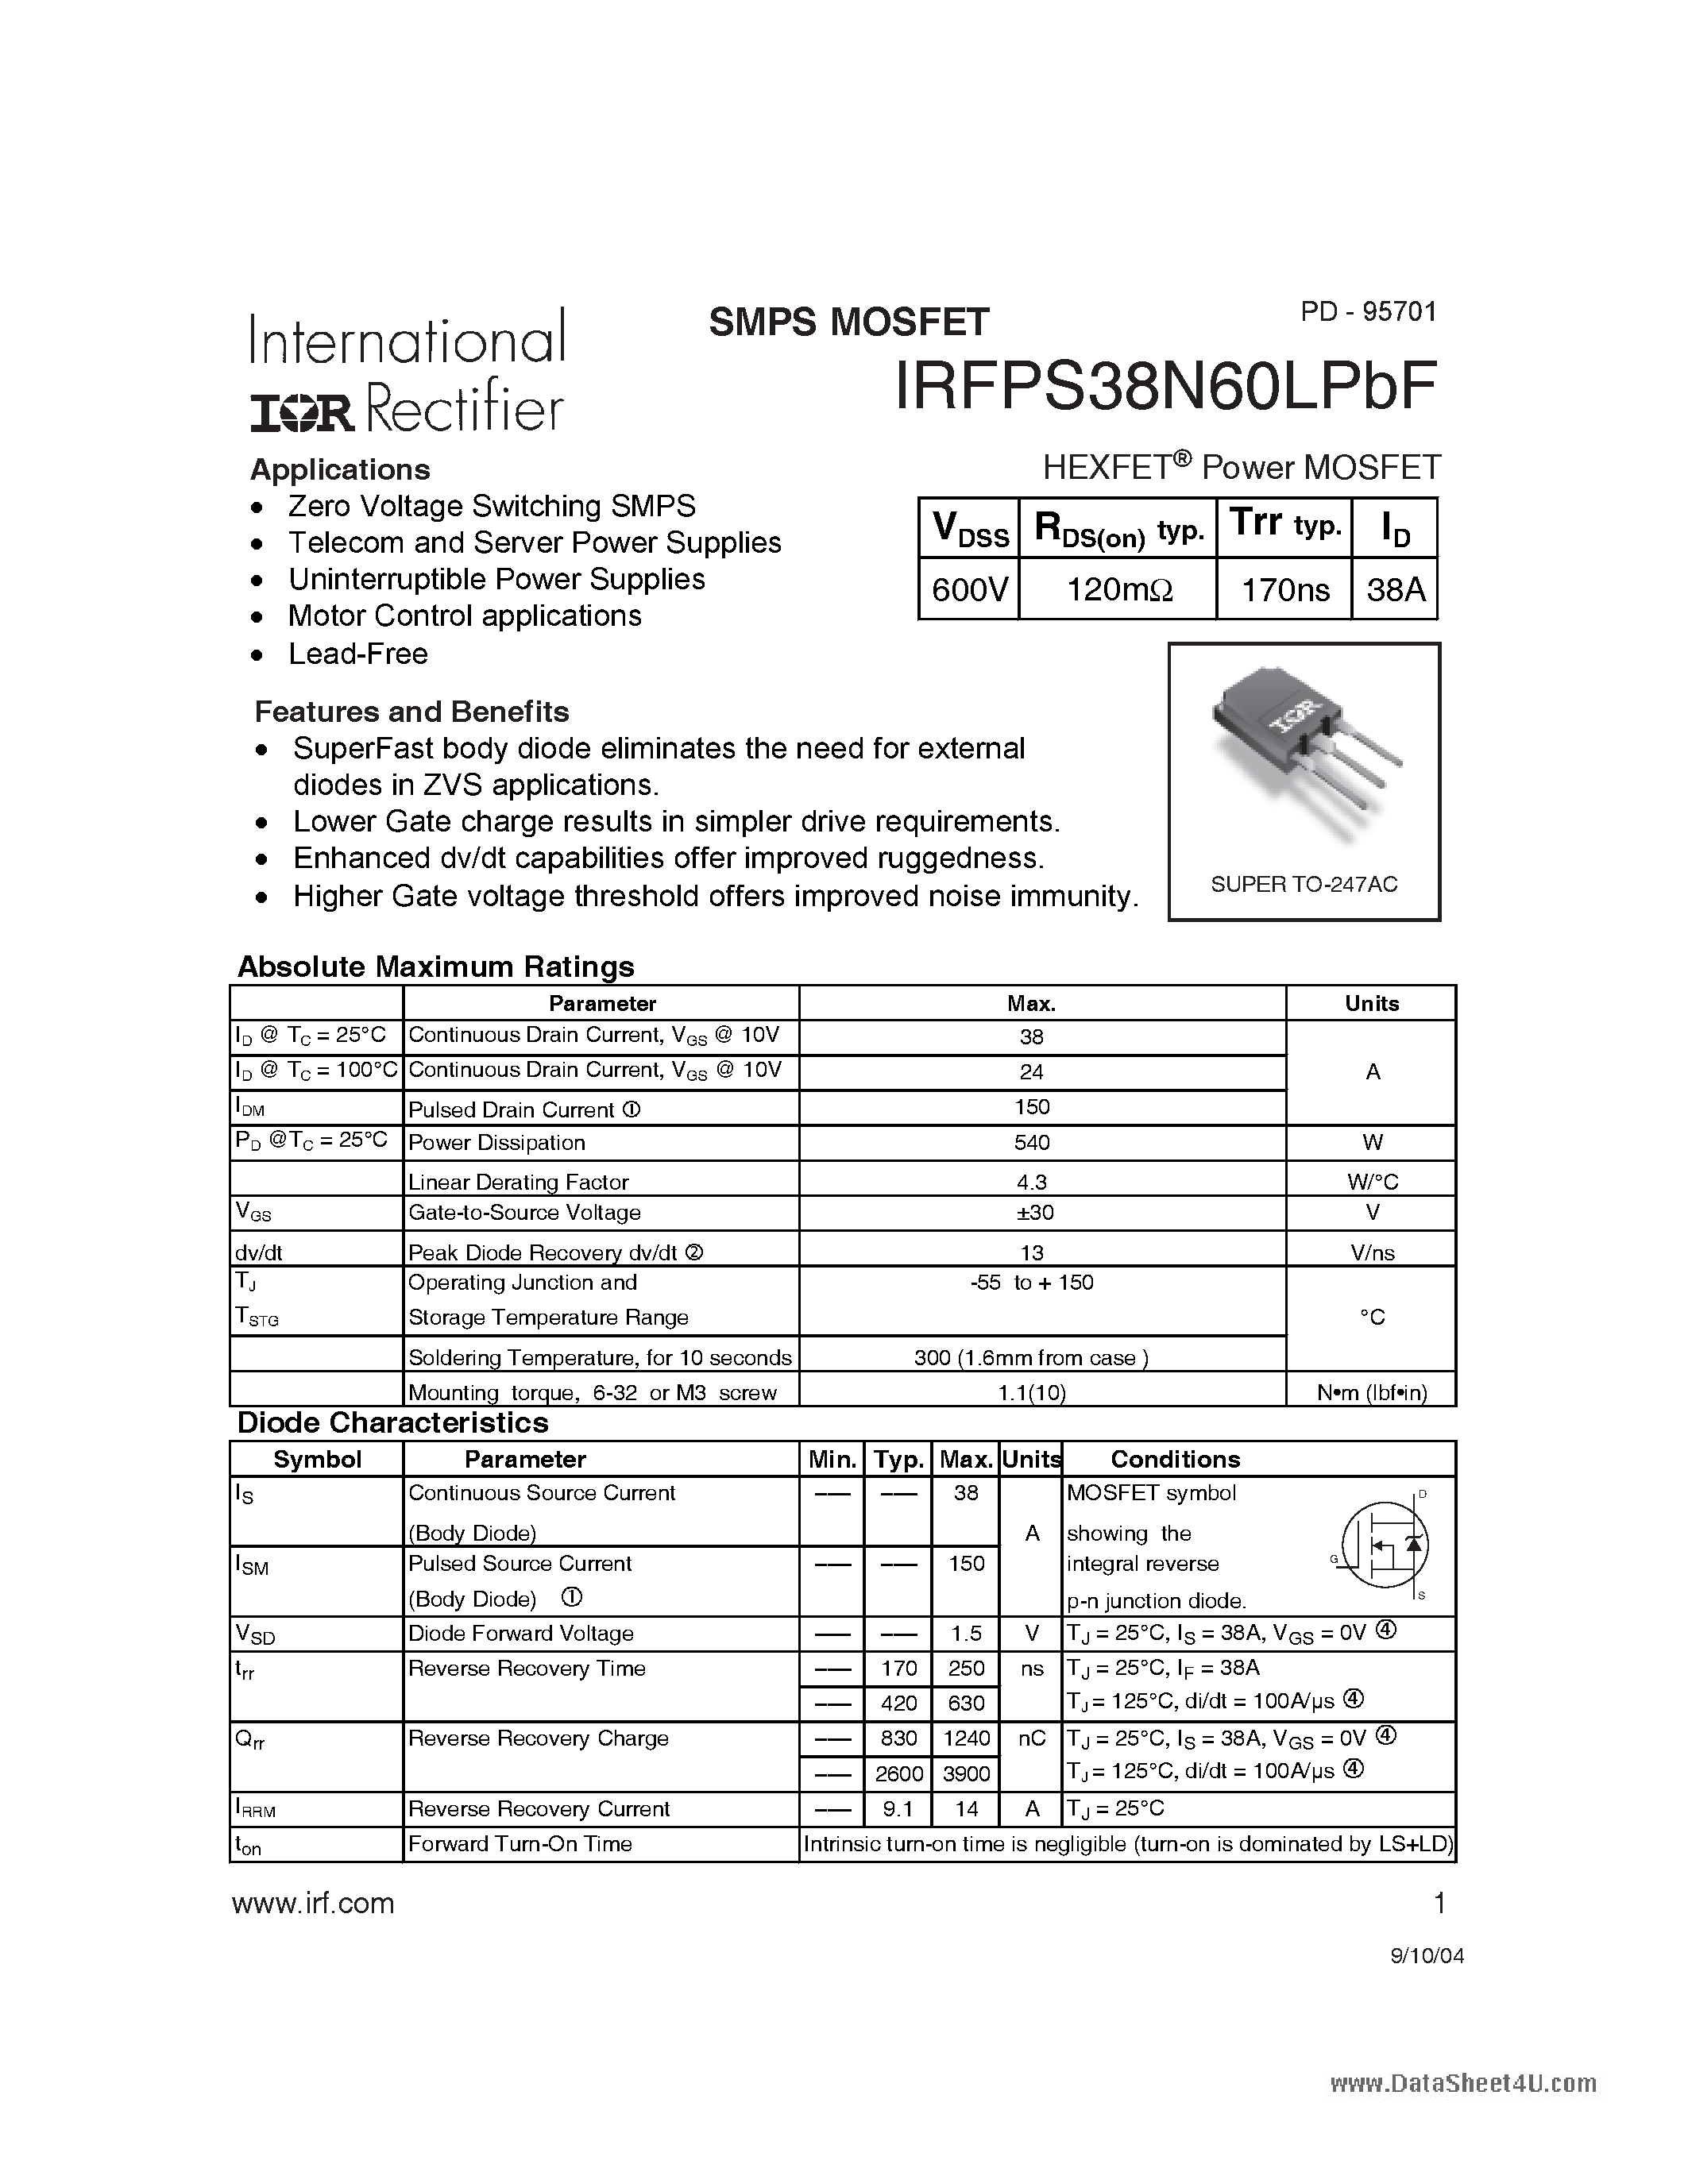 Даташит IRFPS38N60LPBF - HEXFET Power MOSFET страница 1